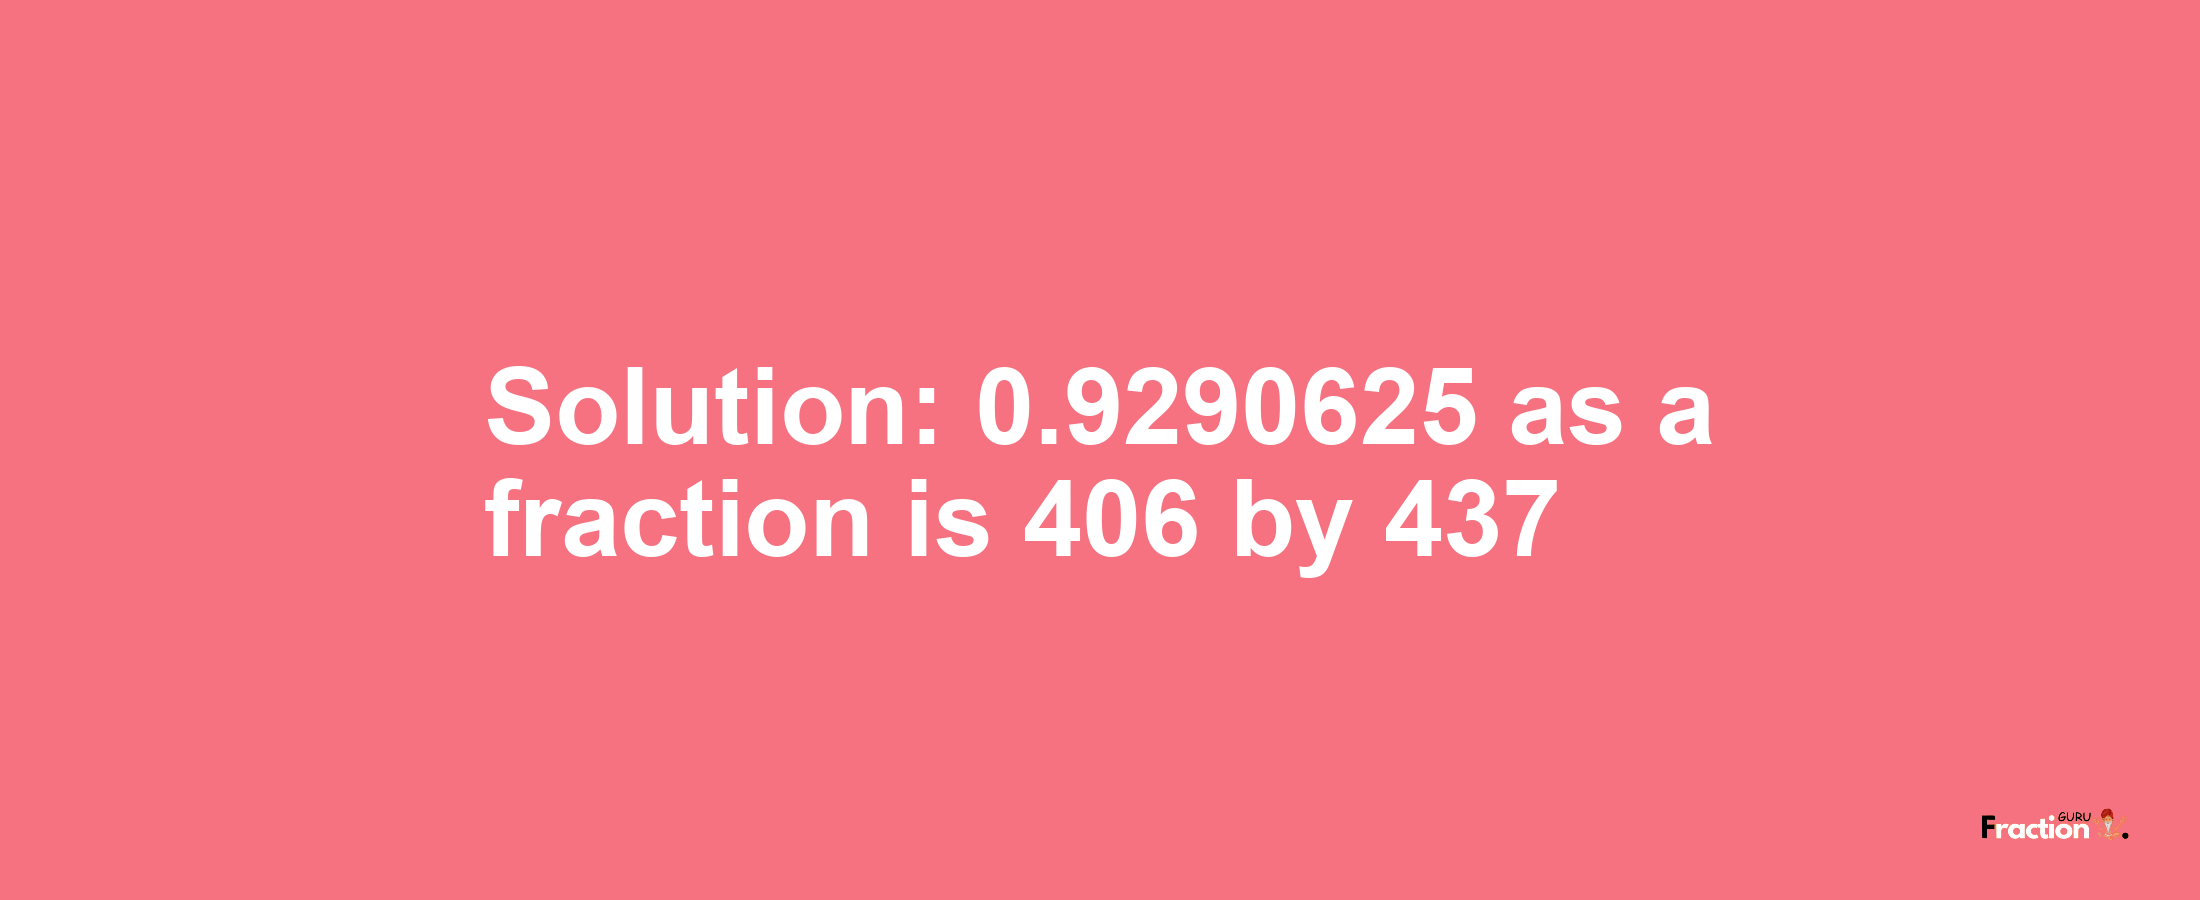 Solution:0.9290625 as a fraction is 406/437